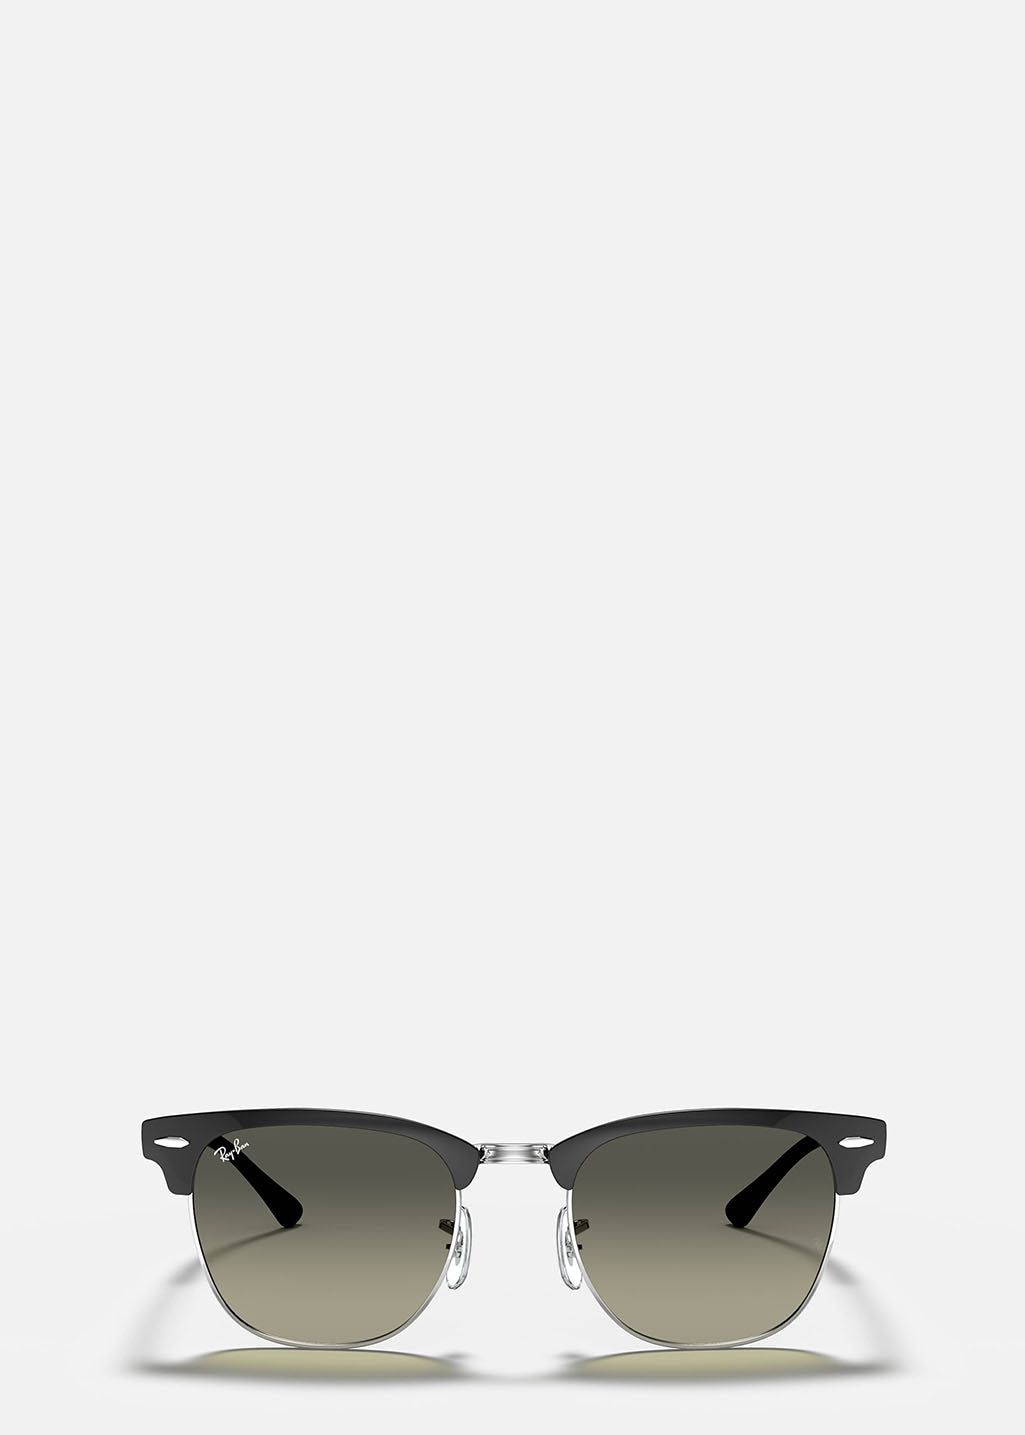 Ray Ban - RB3716 - 900471 - Clubmaster Metal Black on Silver W/ Light Grey